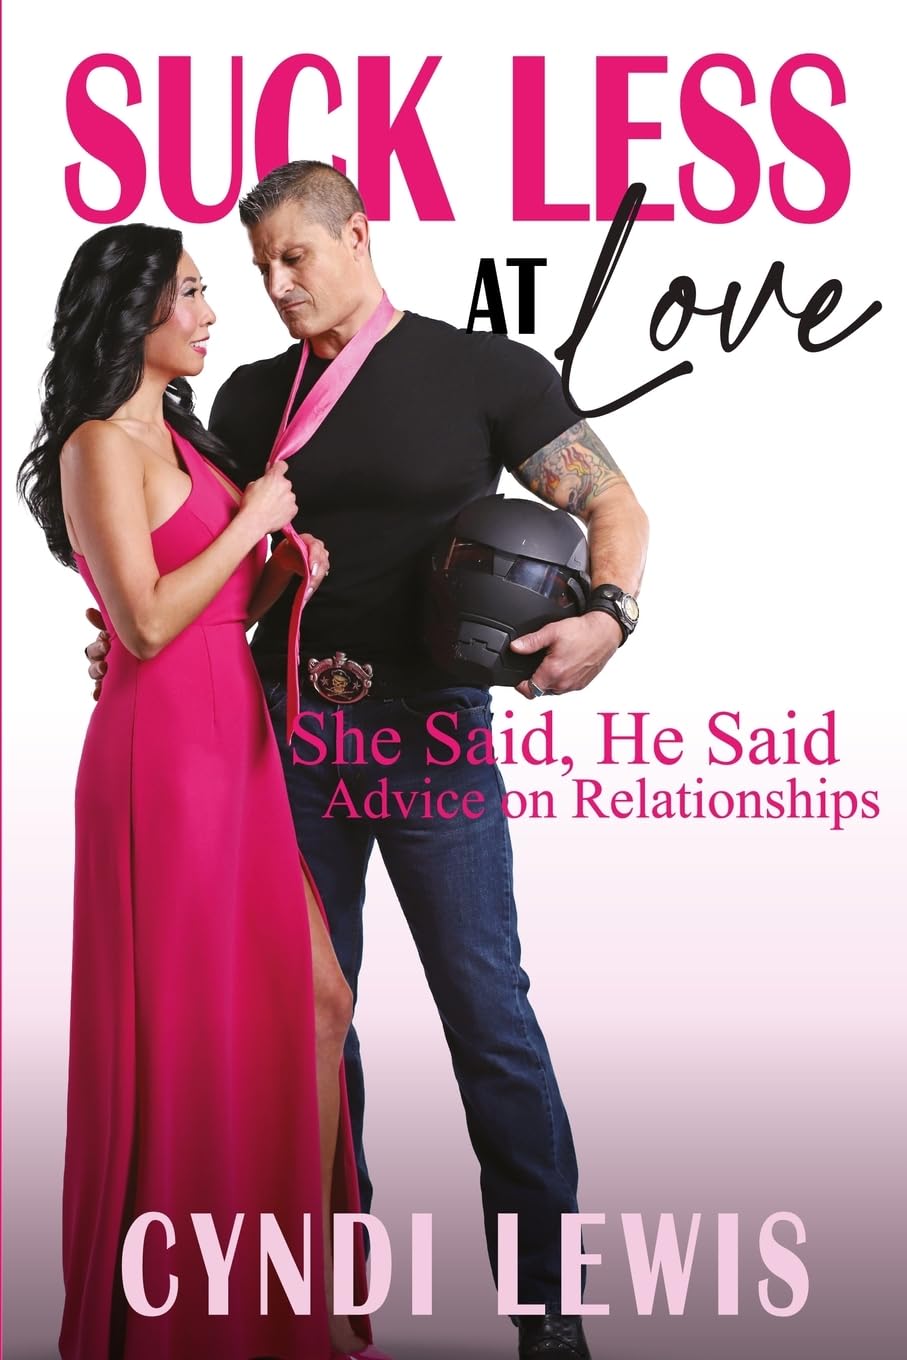 Cyndi Lewis Releases Insightful New Book on Relationships: "Suck Less at Love: She Said, He Said Advice on Relationships"